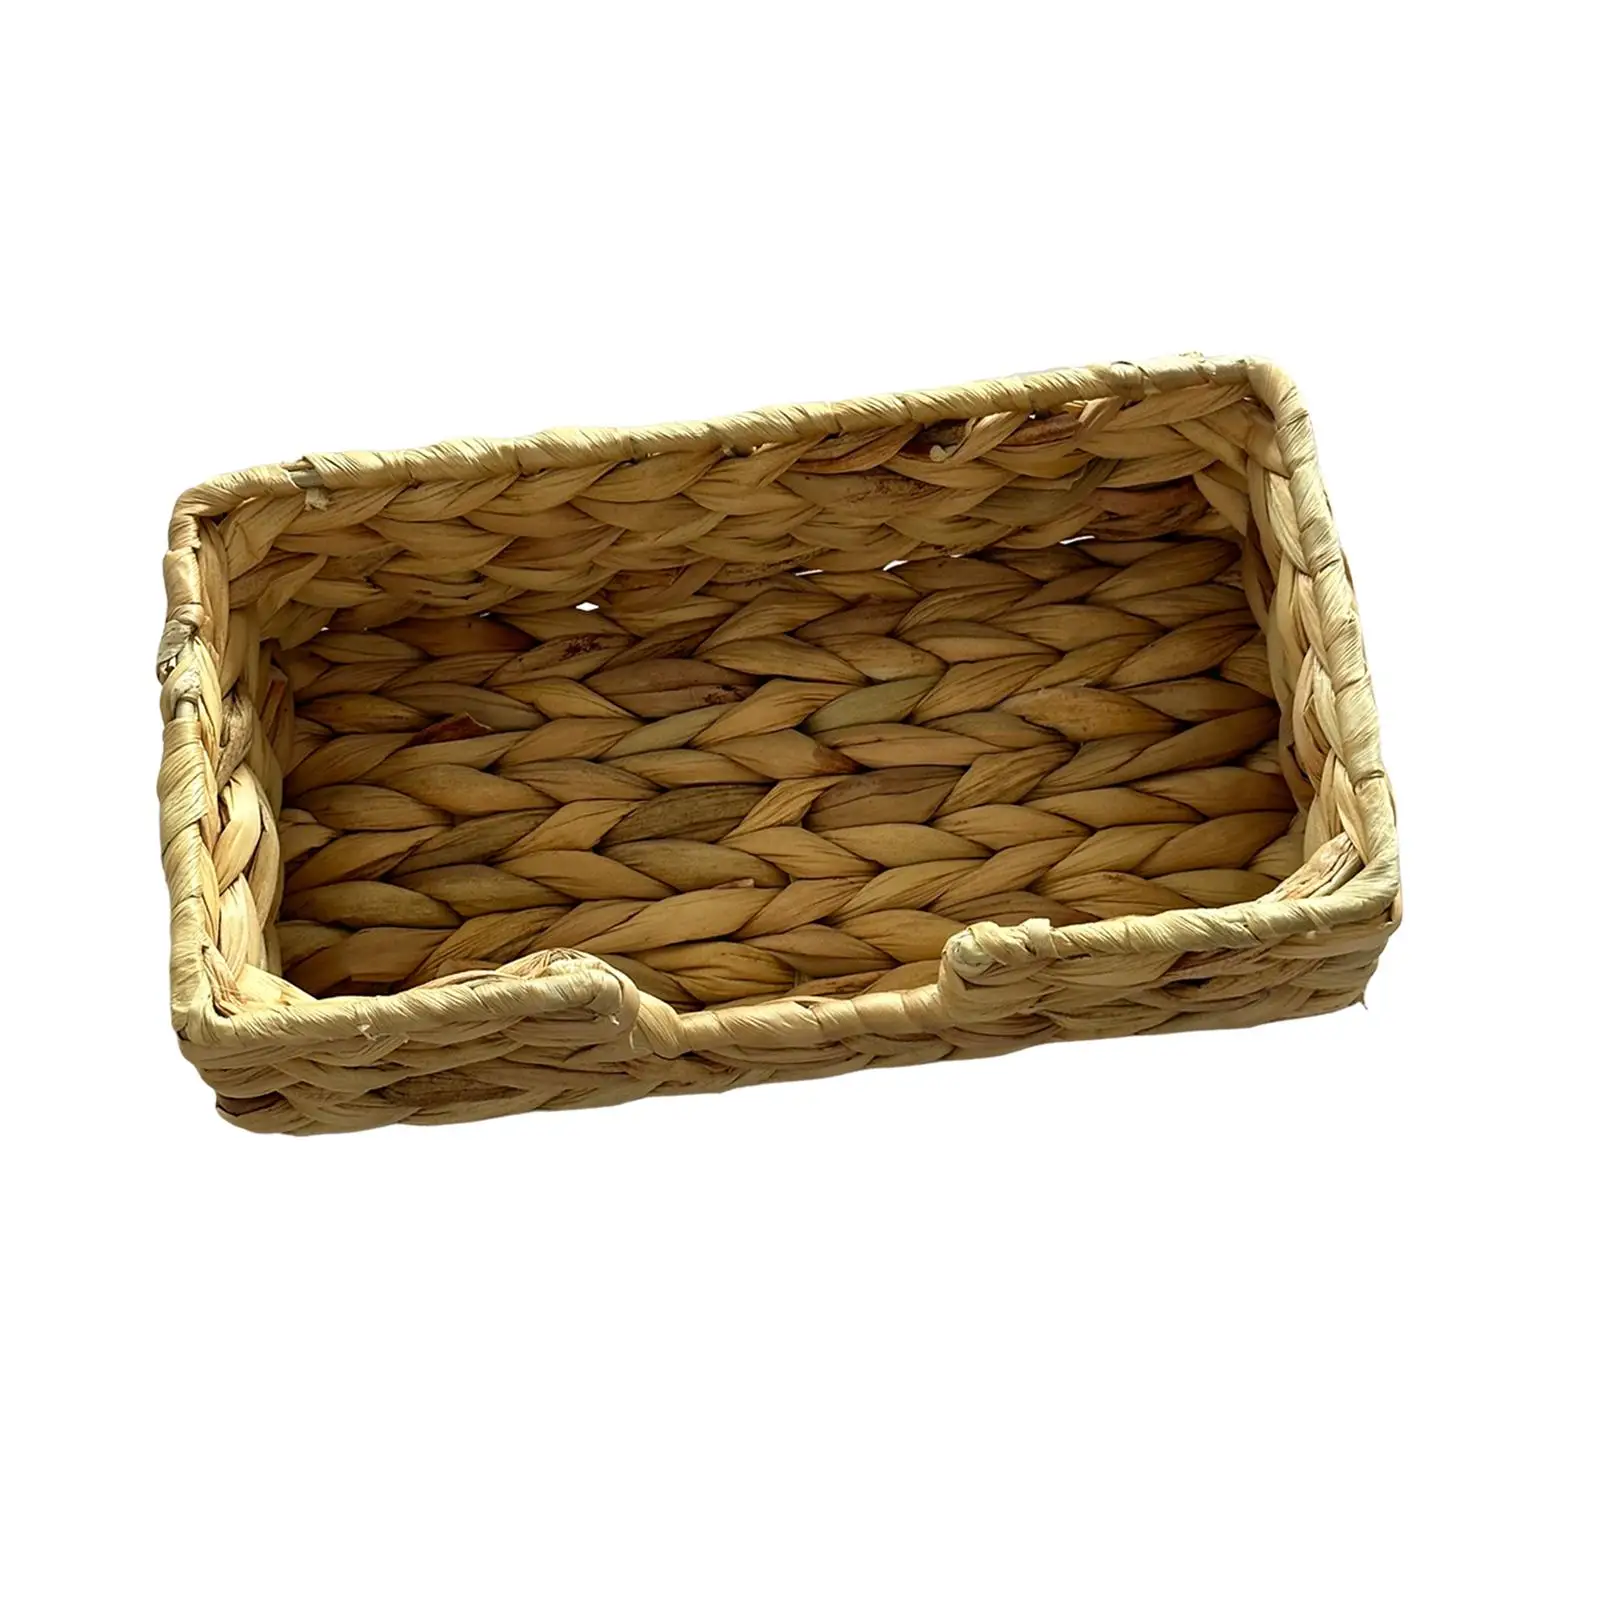 Woven Baskets Rattan Woven Organizer Snacks Serving Tray Container Organizer for Desk Shelves Bedroom Hotel Home Decoration